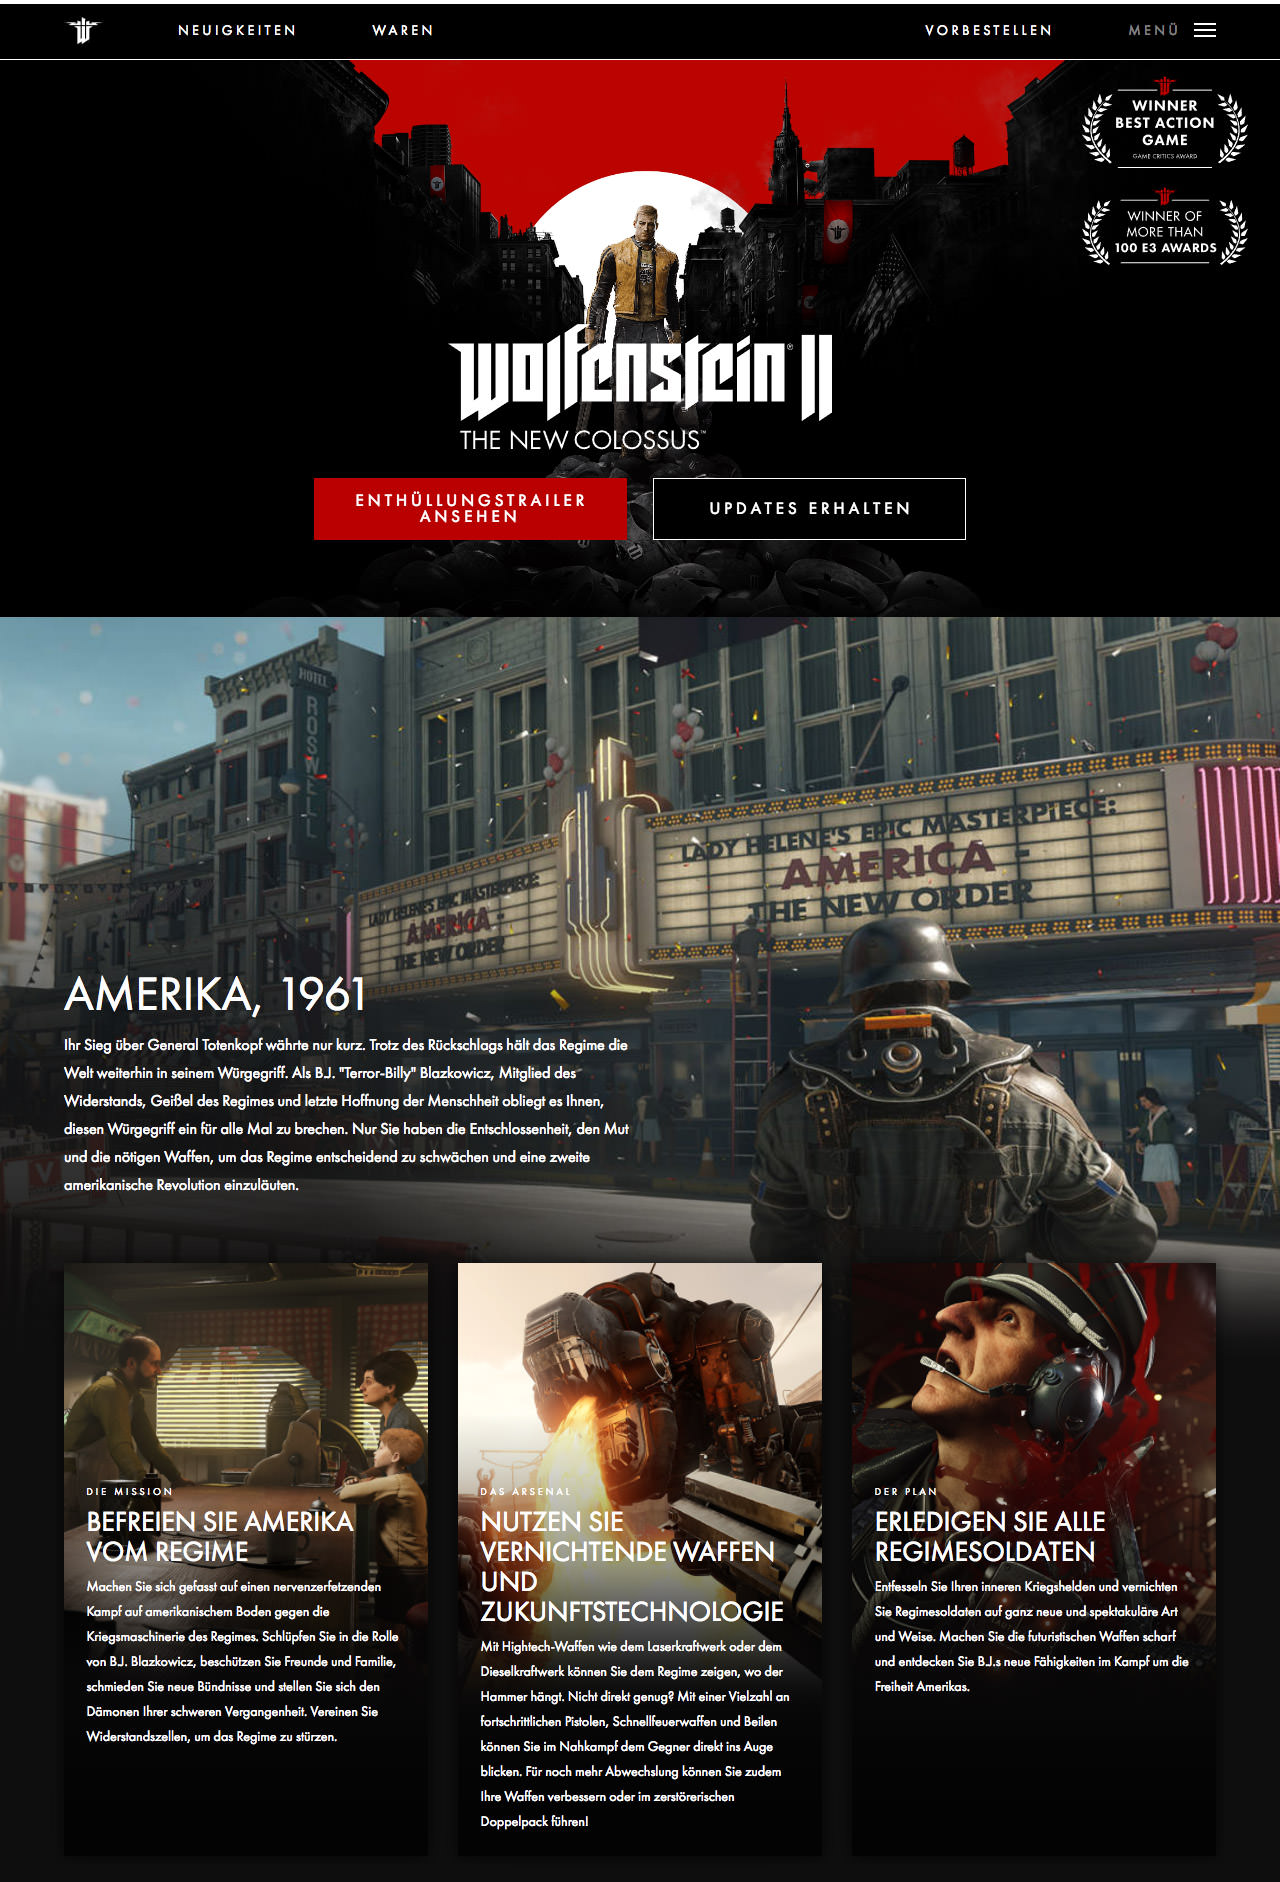 Homepage design in German, featuring censored content and symbols, for the Wolfenstein II site